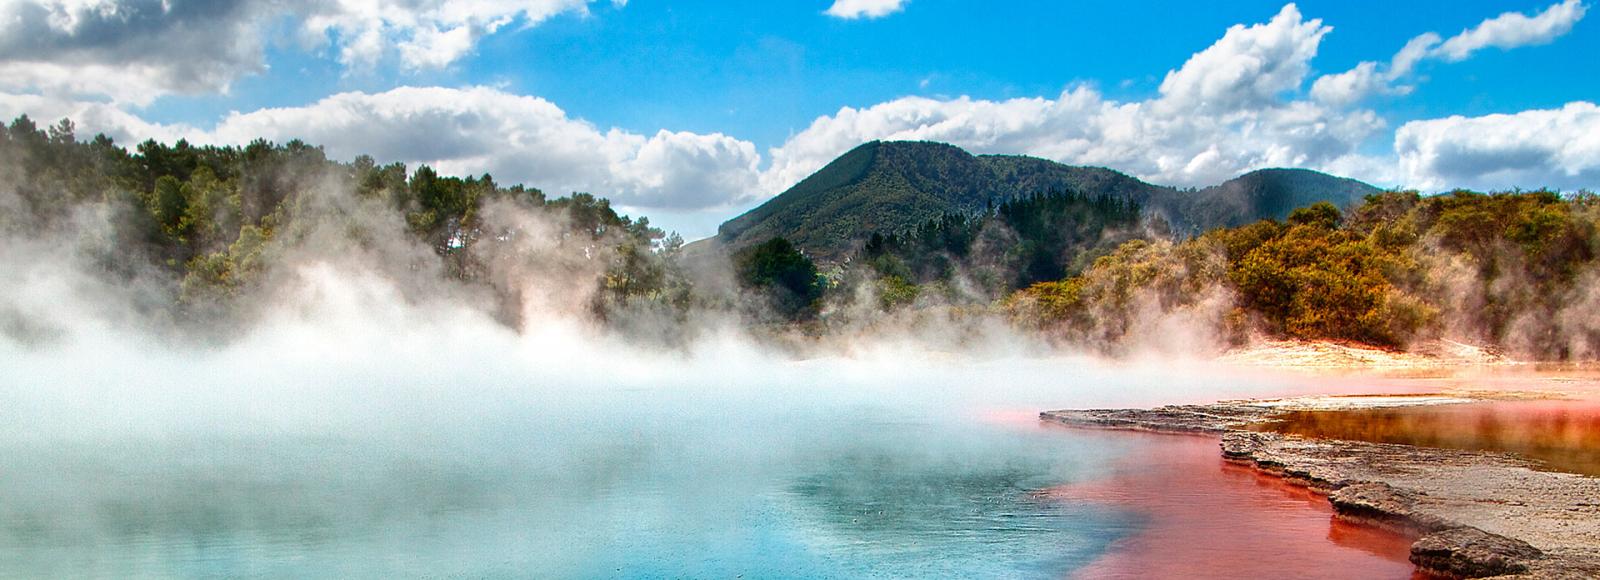 Steaming vents and boiling mud make a typical Rotorua scene.